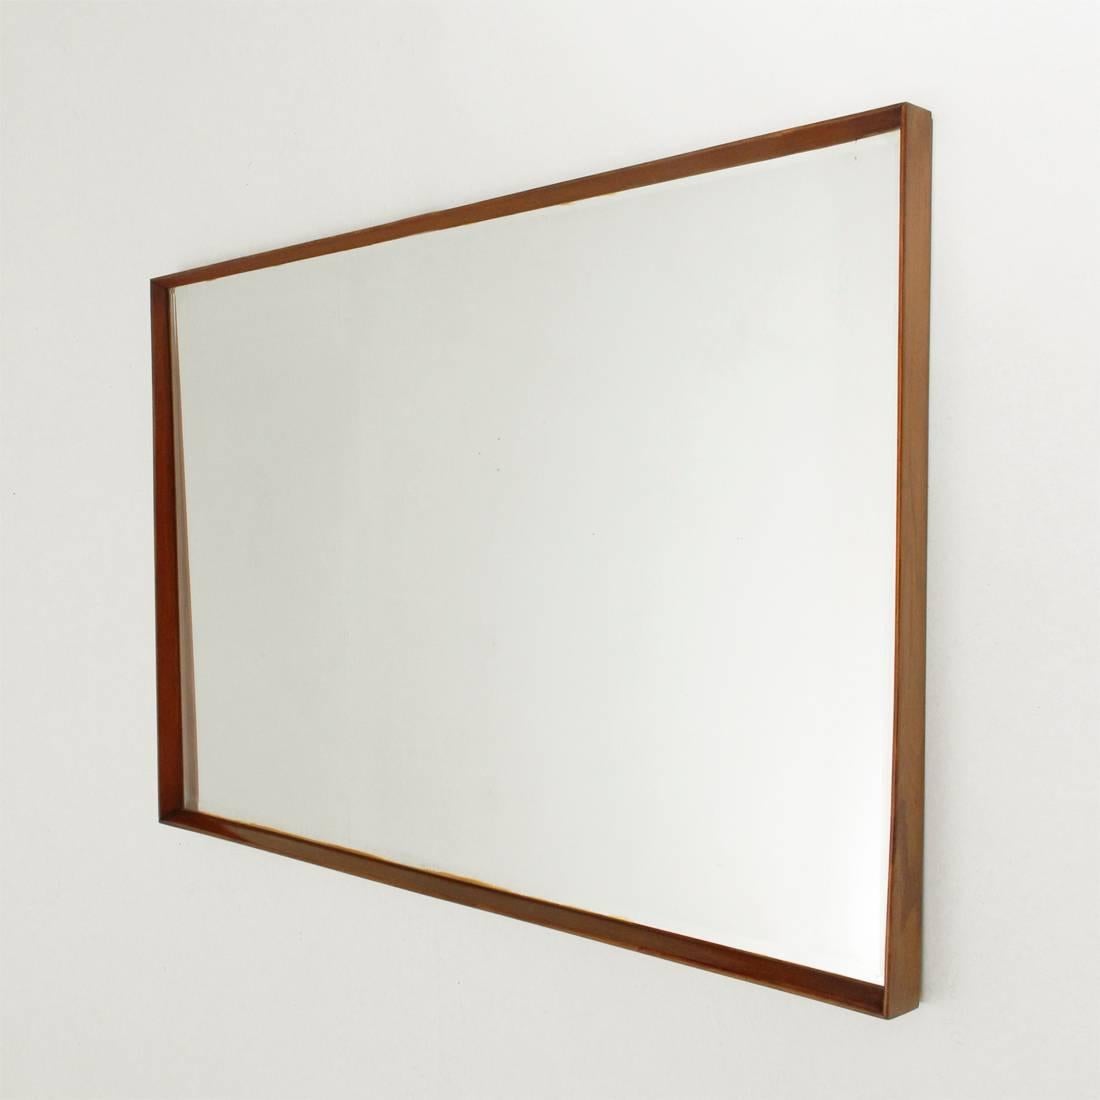 Italian mirror of 1950s production.
Trapezoidal wooden body, mirrored glass surface with bevelled edge and wooden frame.
Good condition, mirror with slight defects.

Dimensions: Top width 143 cm, bottom width 136 cm, depth 6 cm, height 88 cm.